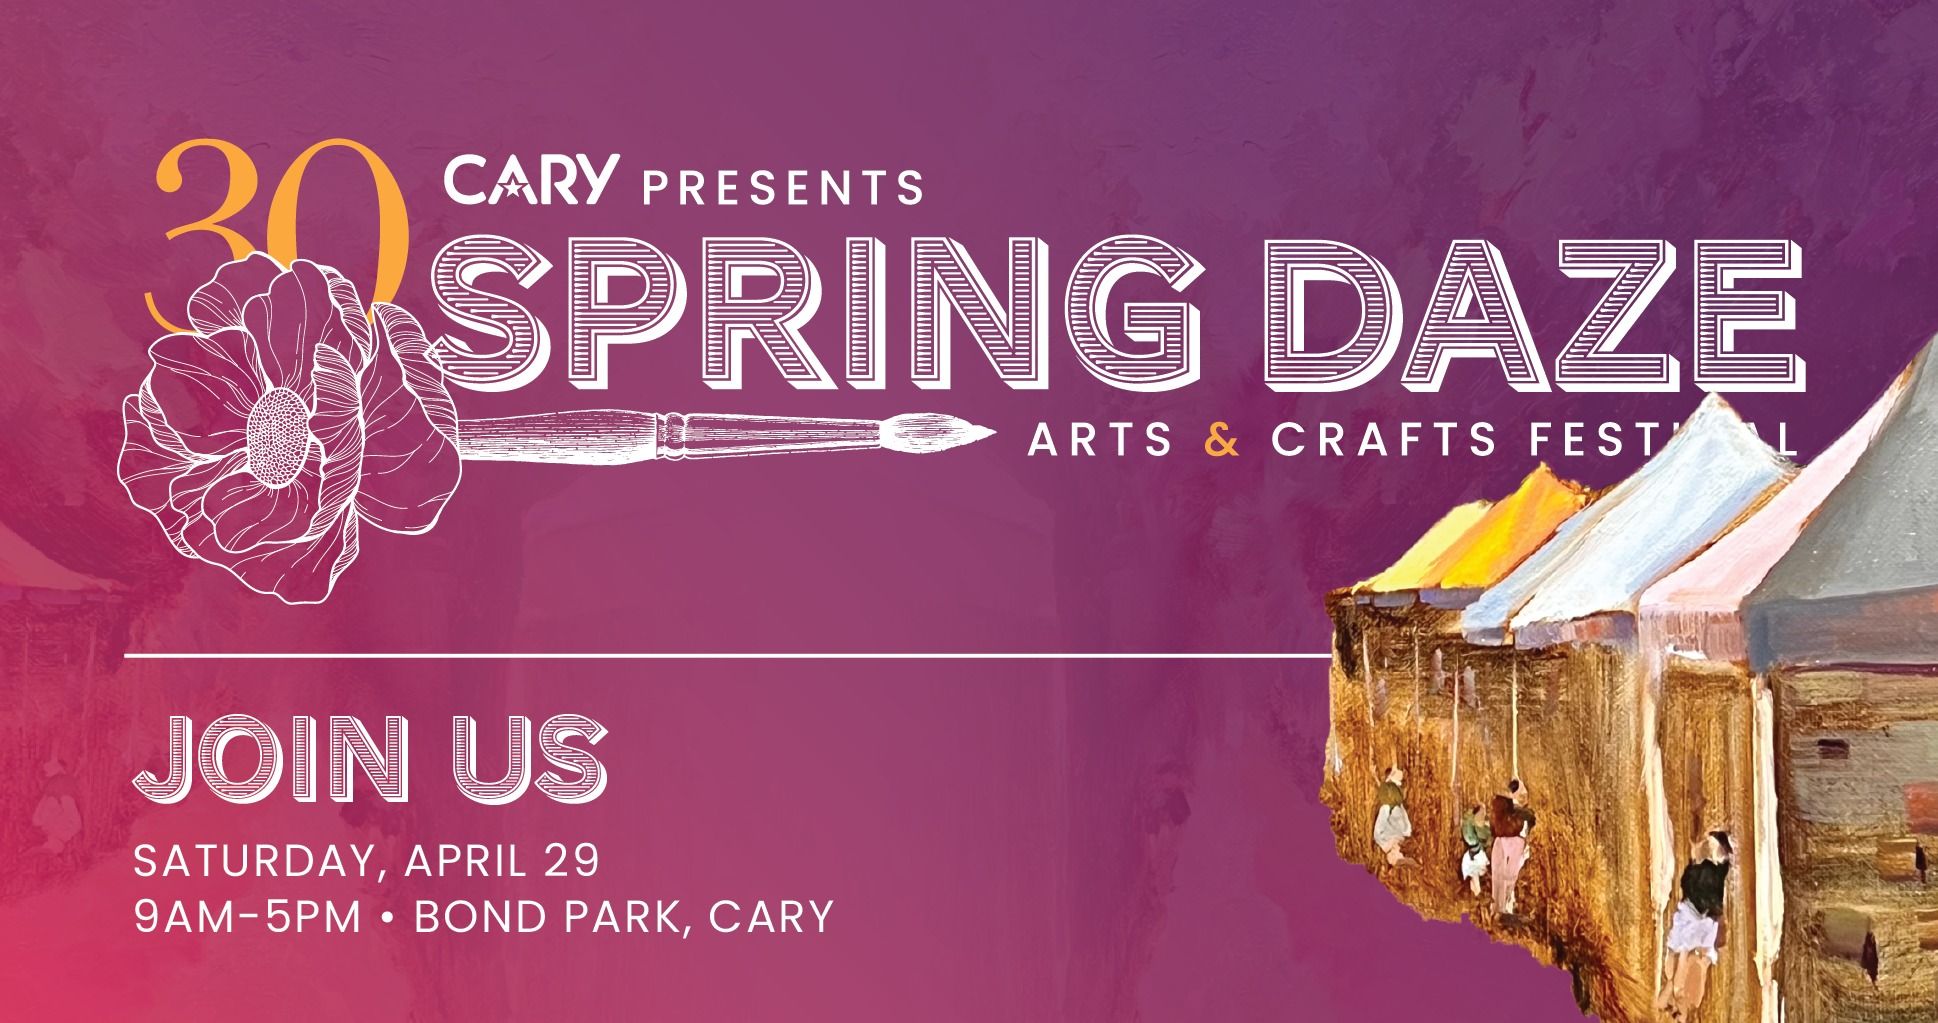 Spring Daze Festival is Tomorrow, April 29th! The Cary Report